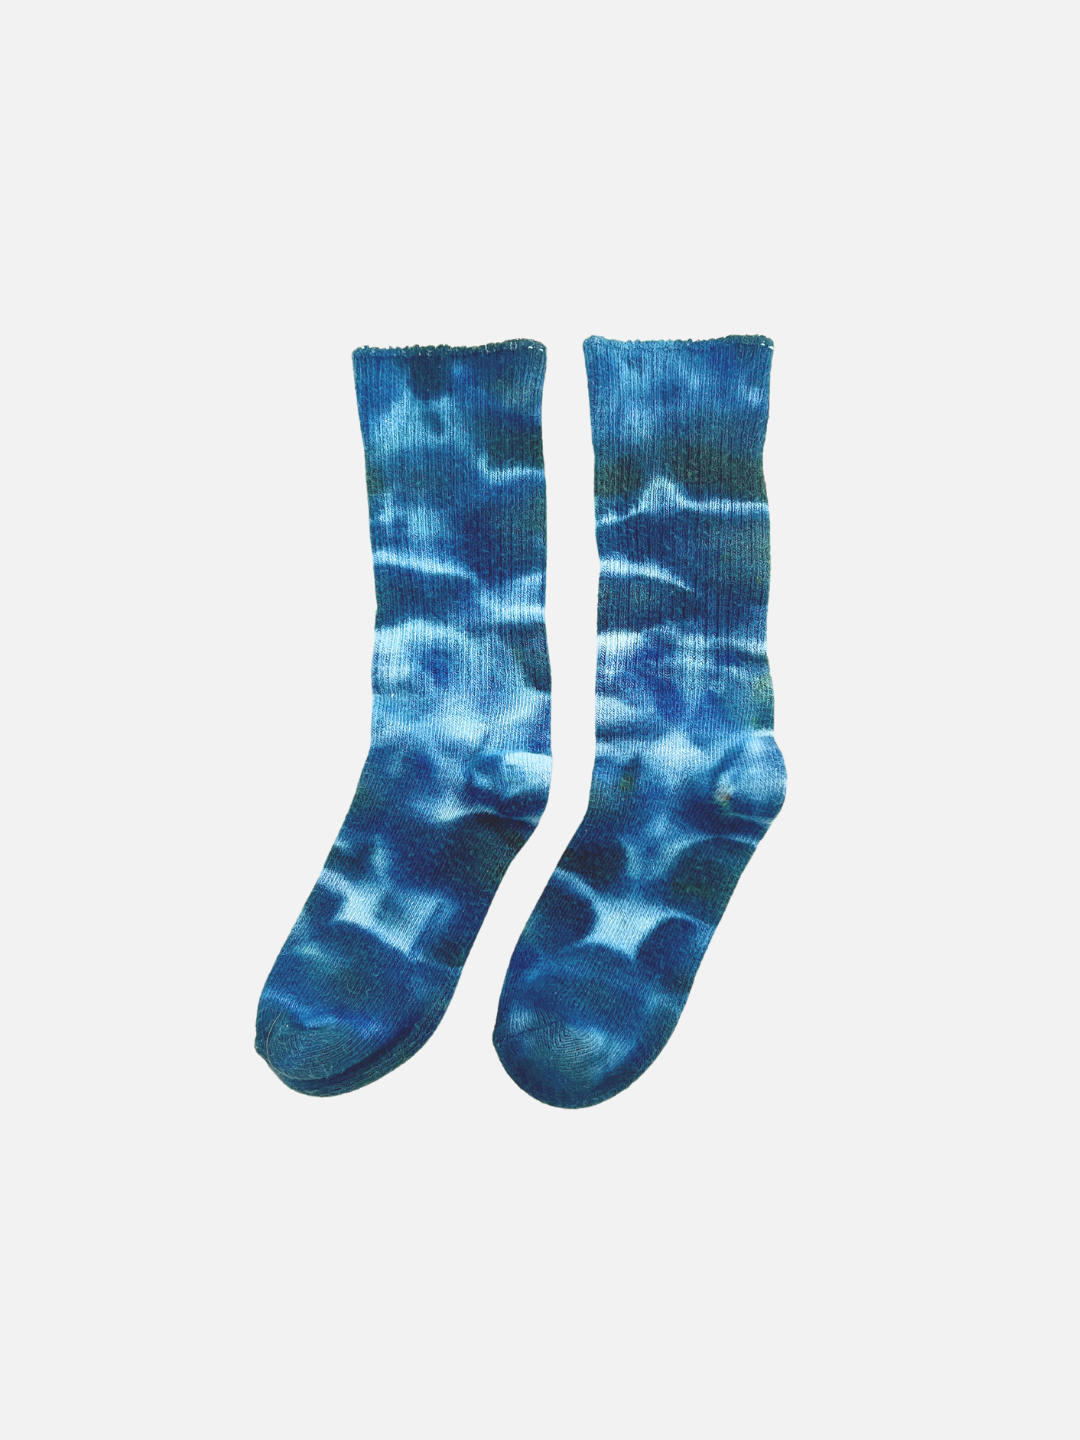 A pair of kids' ankle socks in dappled shades of blue and green